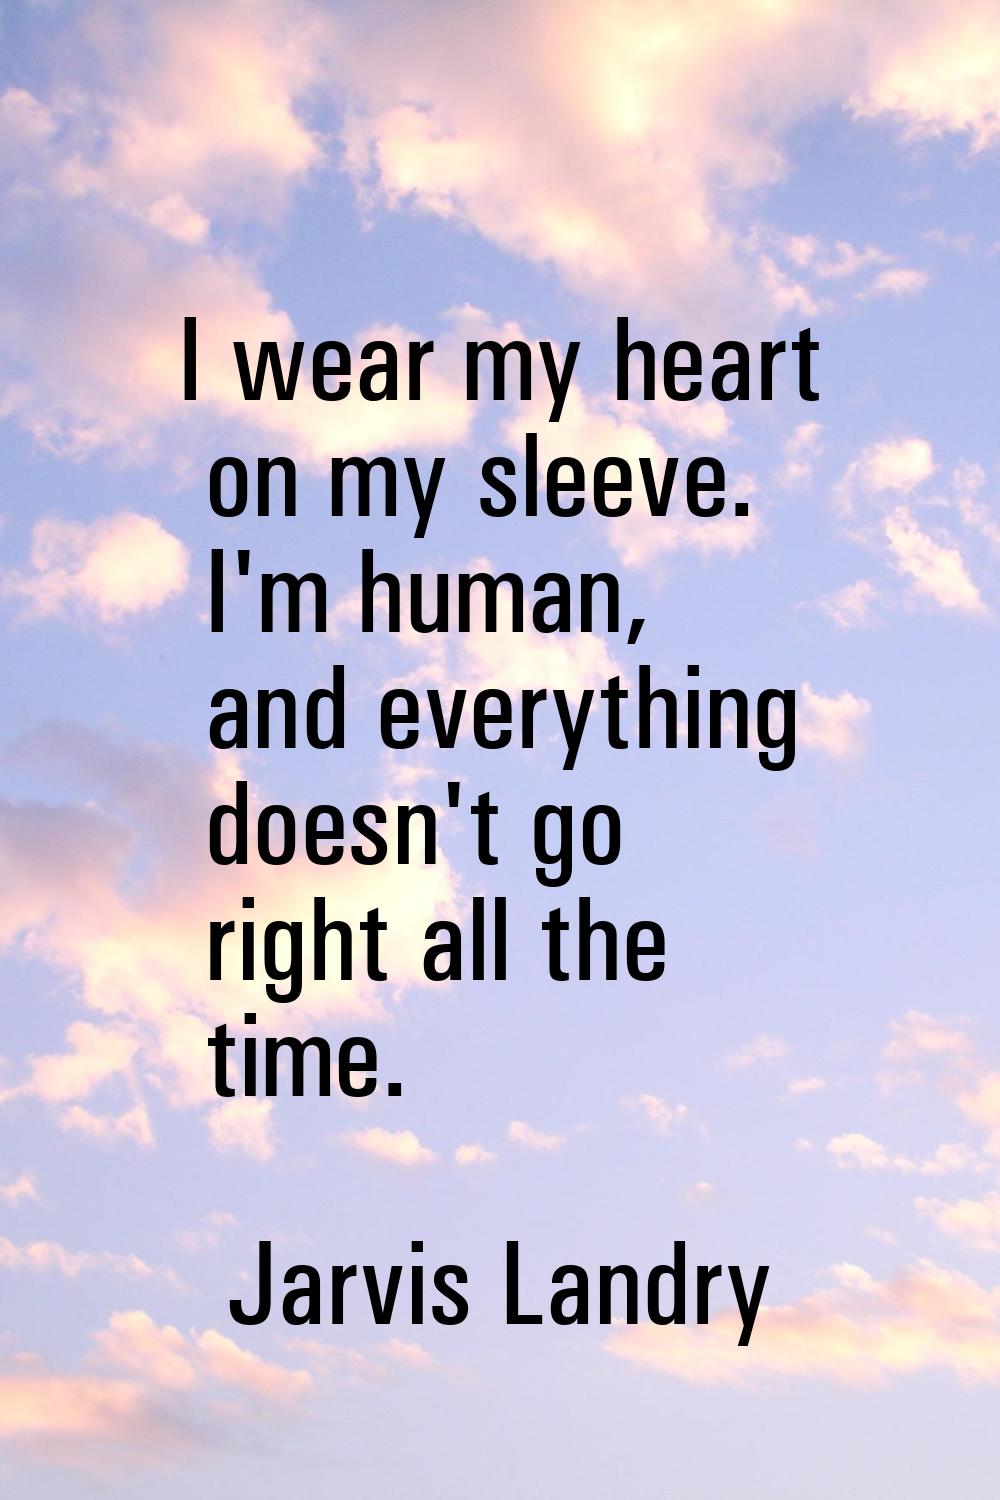 I wear my heart on my sleeve. I'm human, and everything doesn't go right all the time.